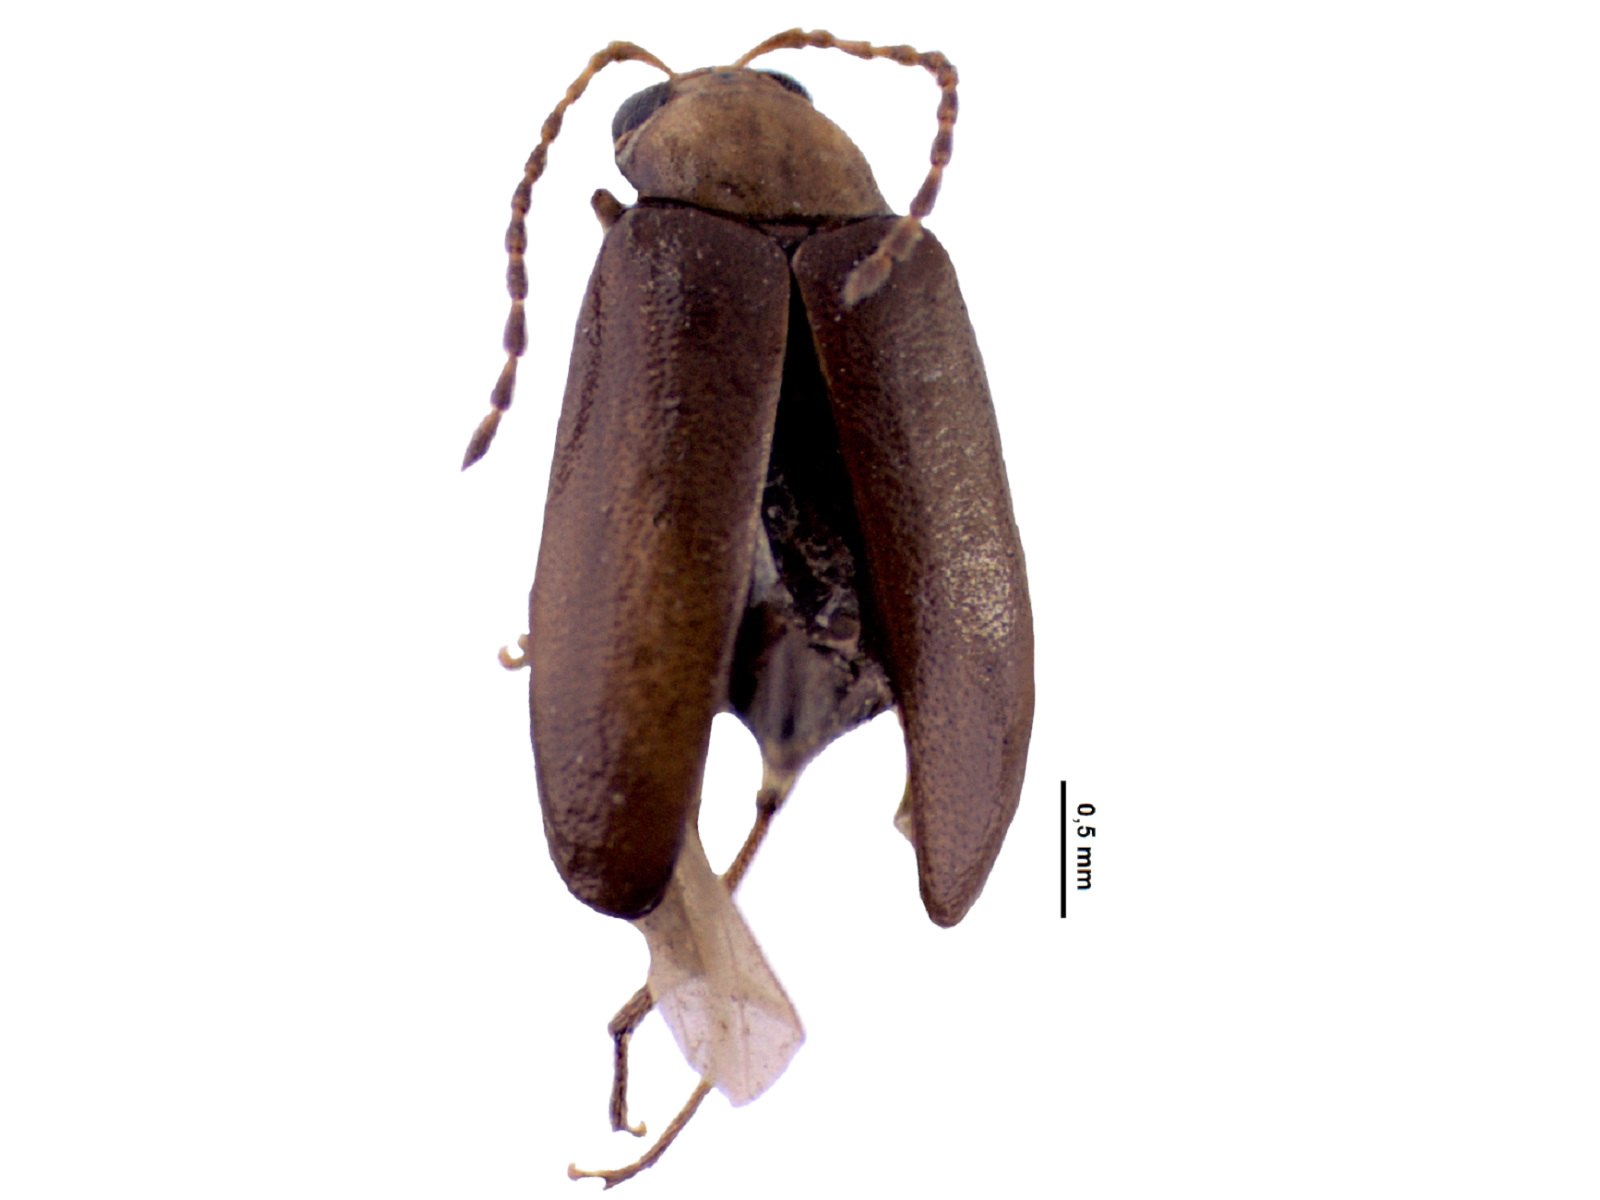 Luperodes brunneus (Crotch, 1873)